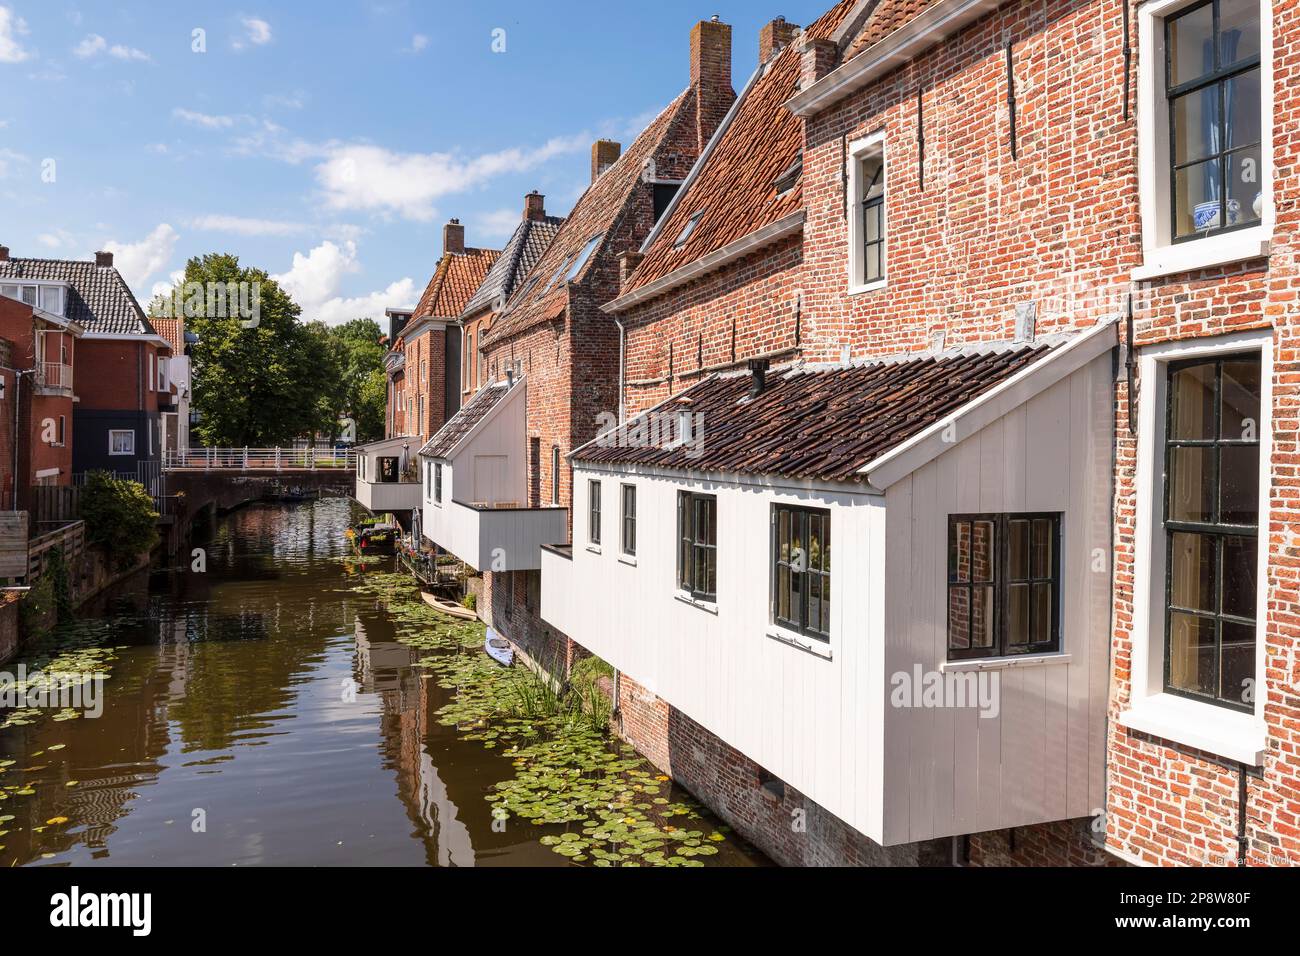 Old houses with attached kitchens above the canal in the picturesque town of Appingedam in the province of Groningen in the Netherlands. Stock Photo